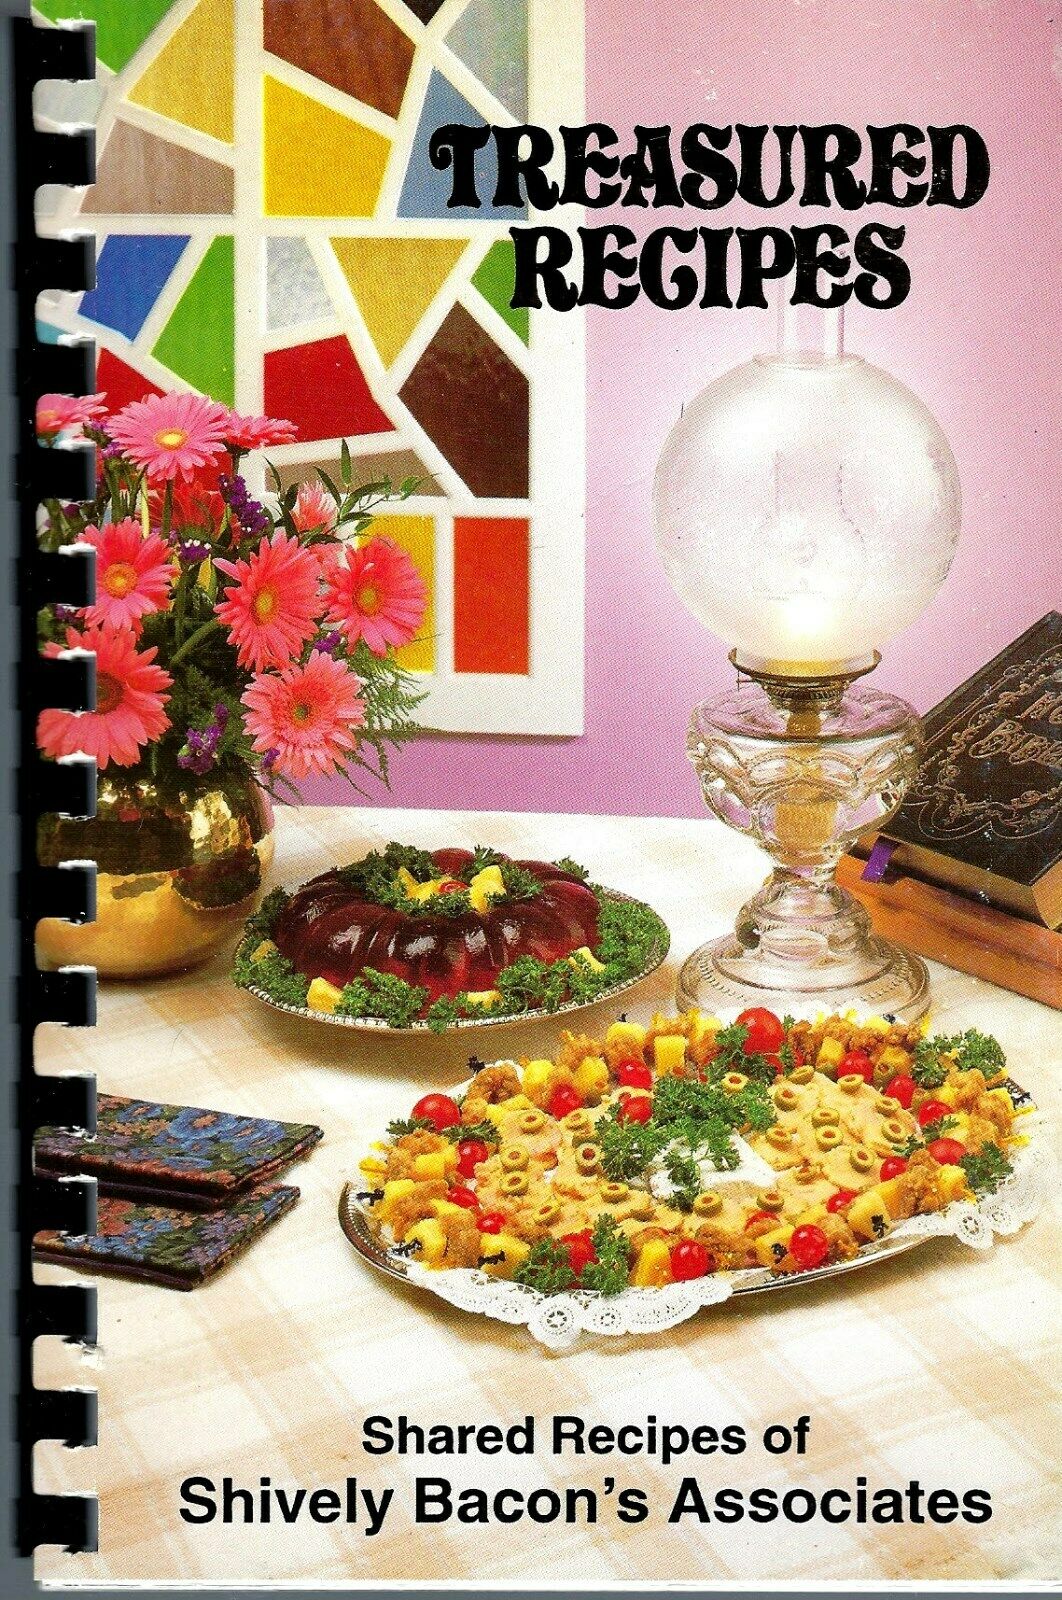 Shively Ky 1993 Bacon's Employees Cook Book * Treasured Recipes * Kentucky Local